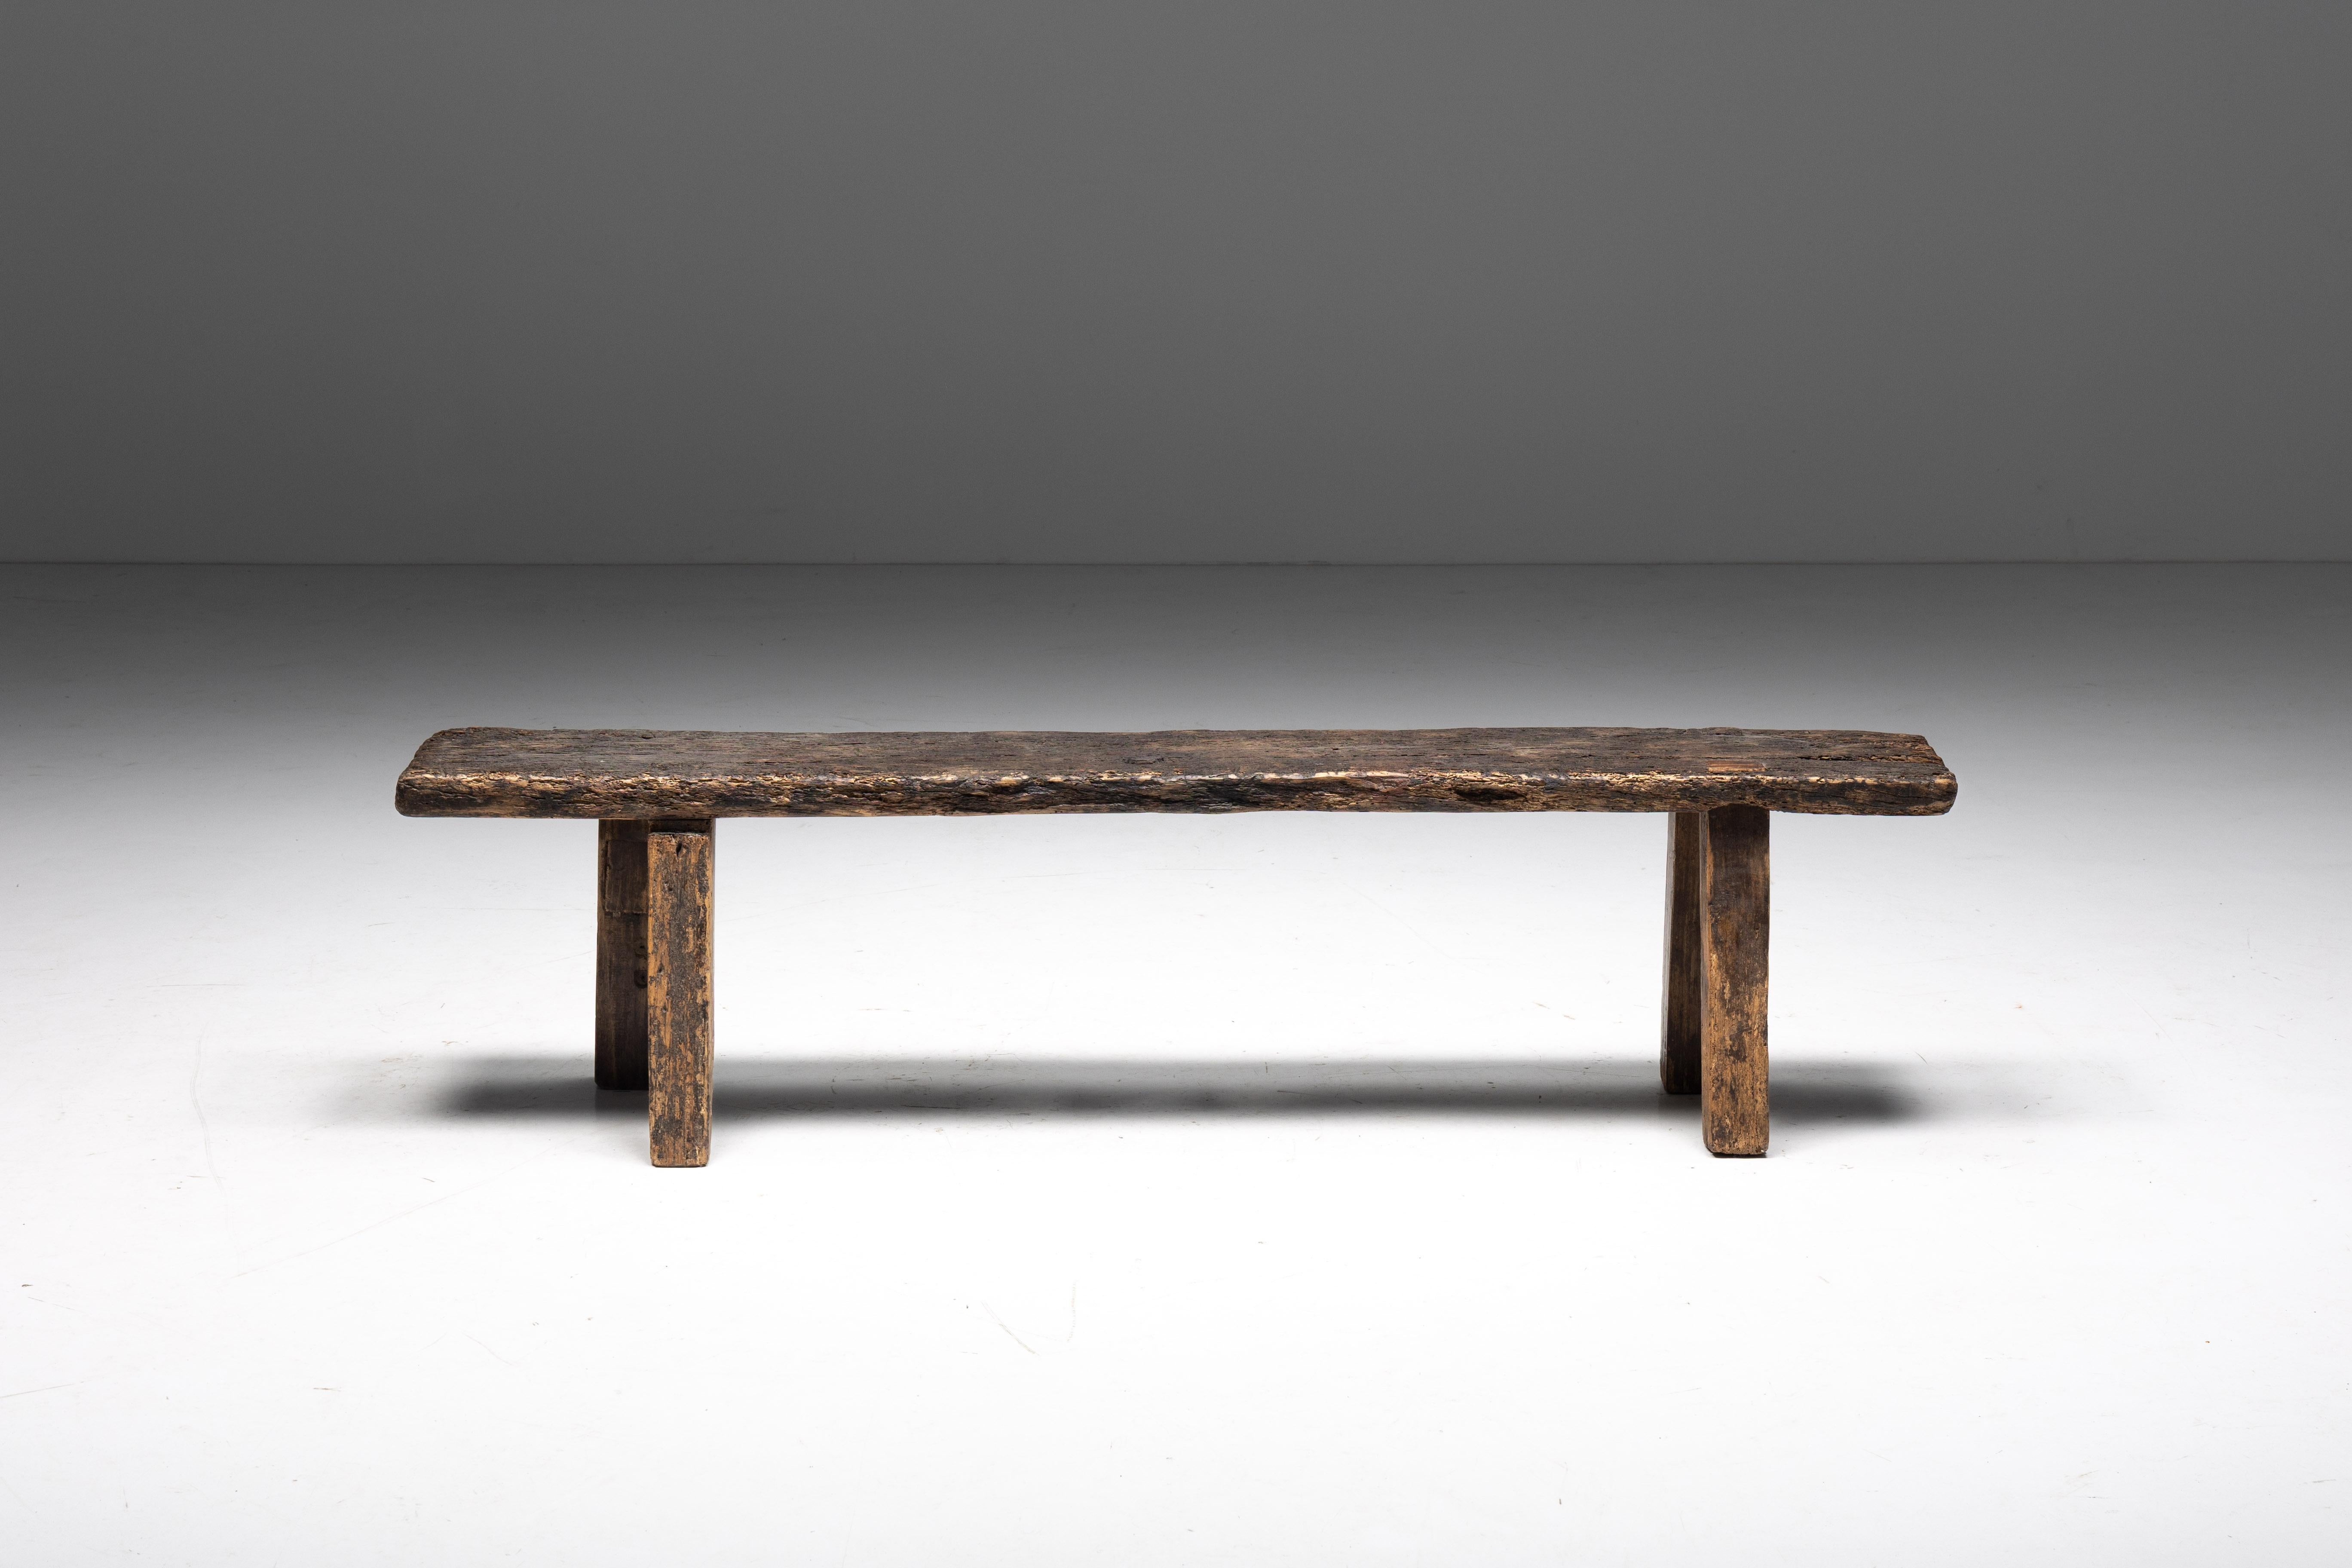 Rustic; Art Populaire; Folk Art; Travail Populaire; Bench; Monoxylite; Wabi Sabi; 20th Century; Antique;

Early 20th century bench, seamlessly integrating wabi-sabi design elements. Crafted with care, this rustic bench reflects the imperfections